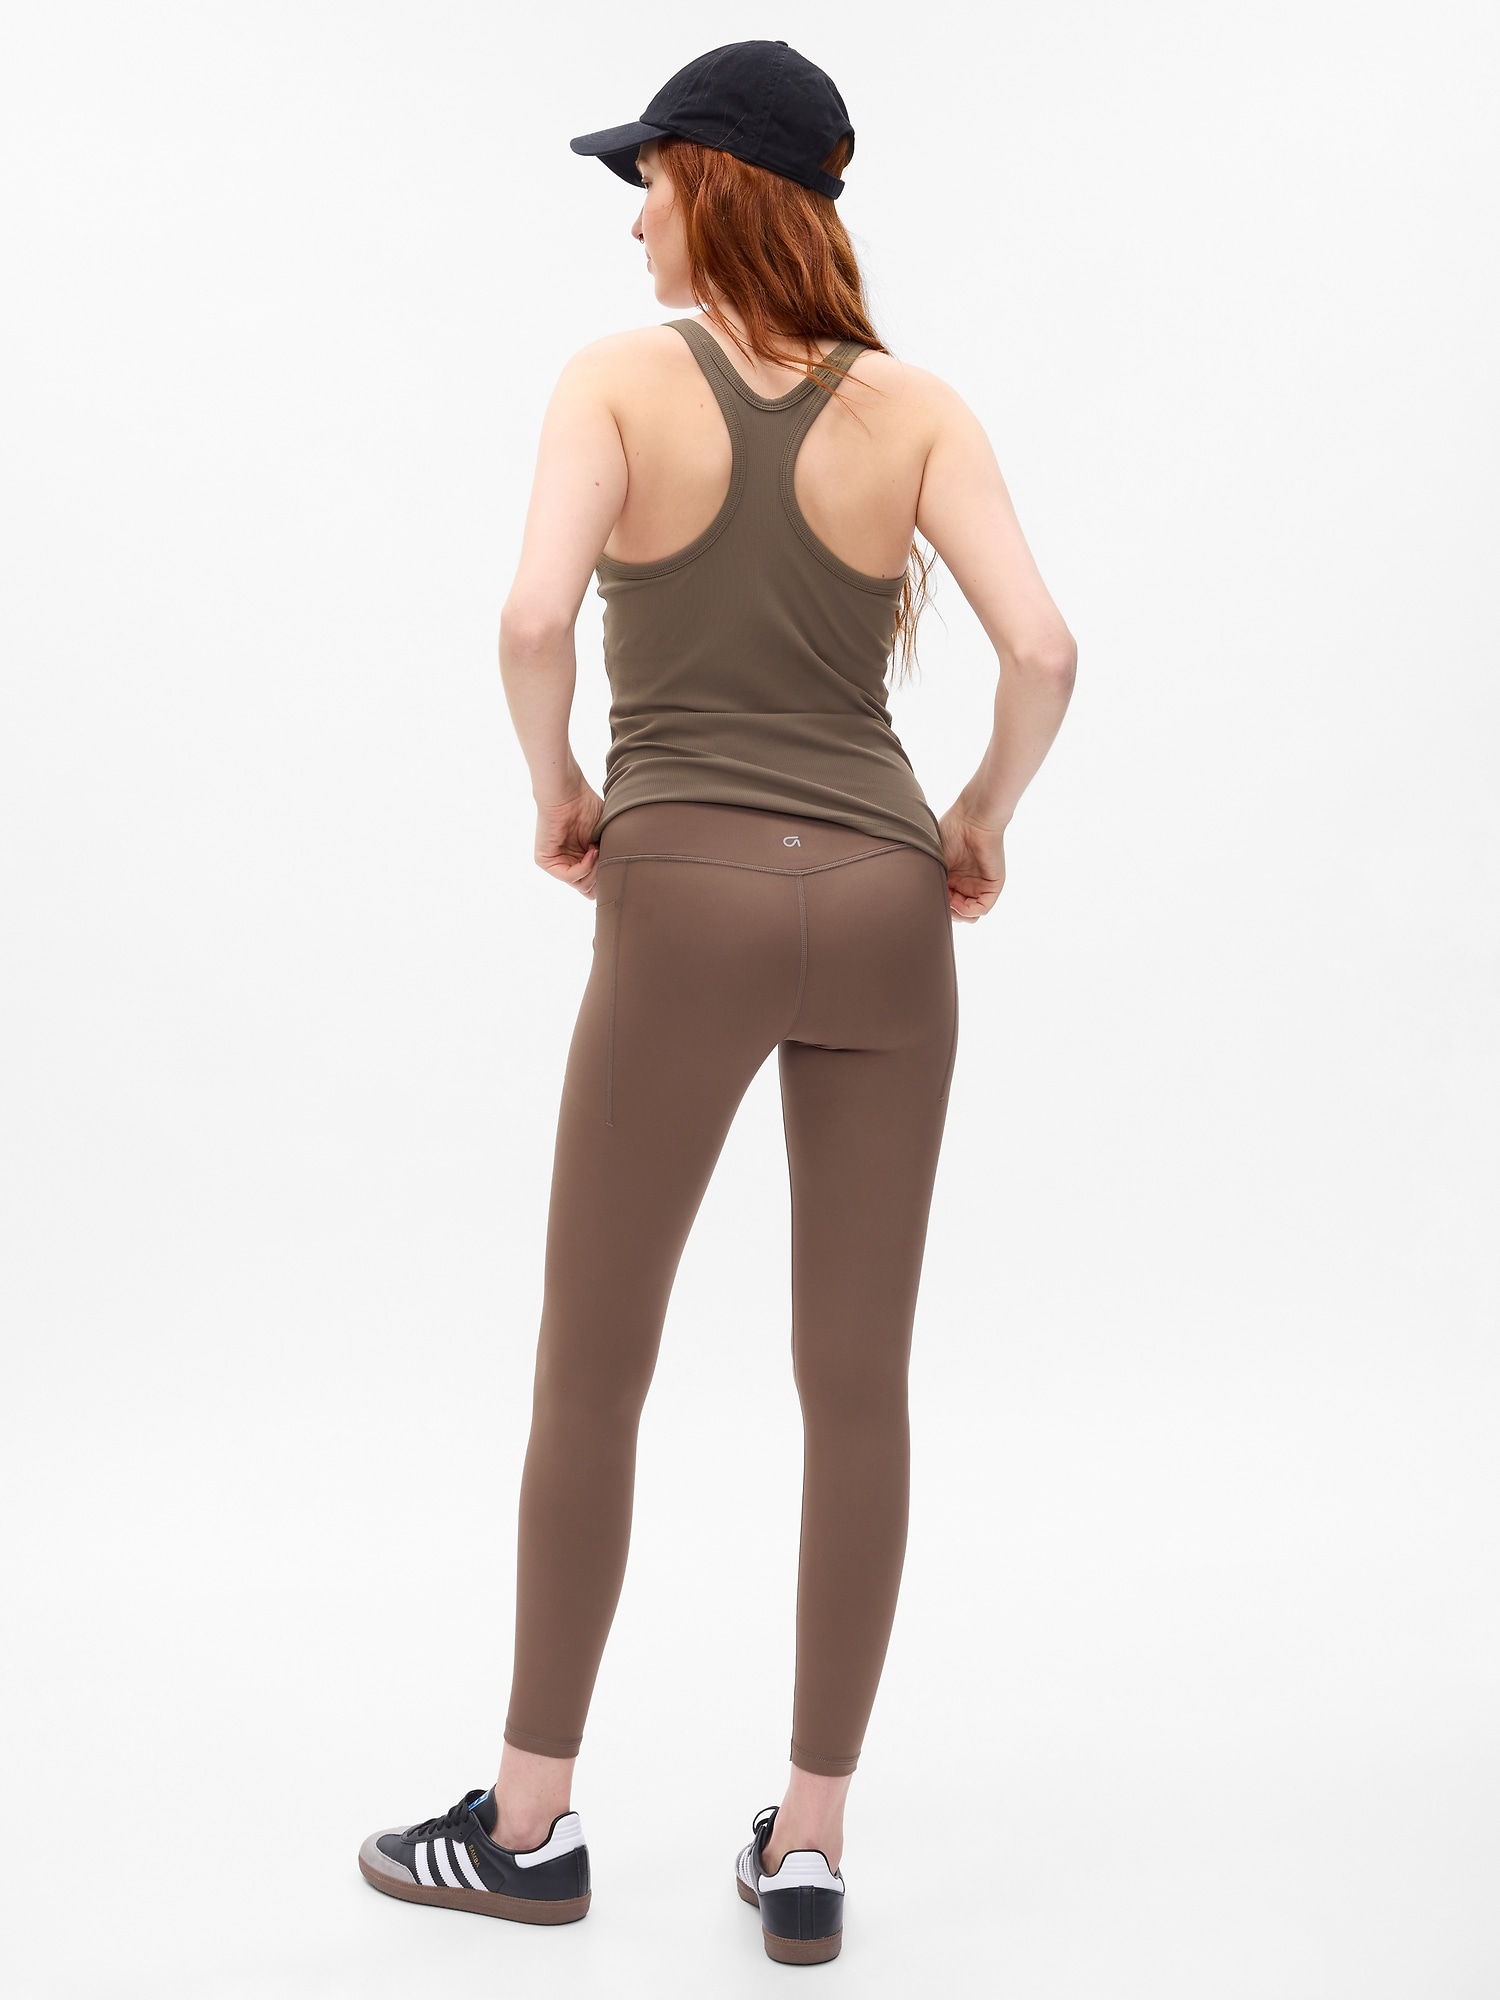 Gap Fit PowerMove High Rise Ankle Legging Size Small - $24 - From